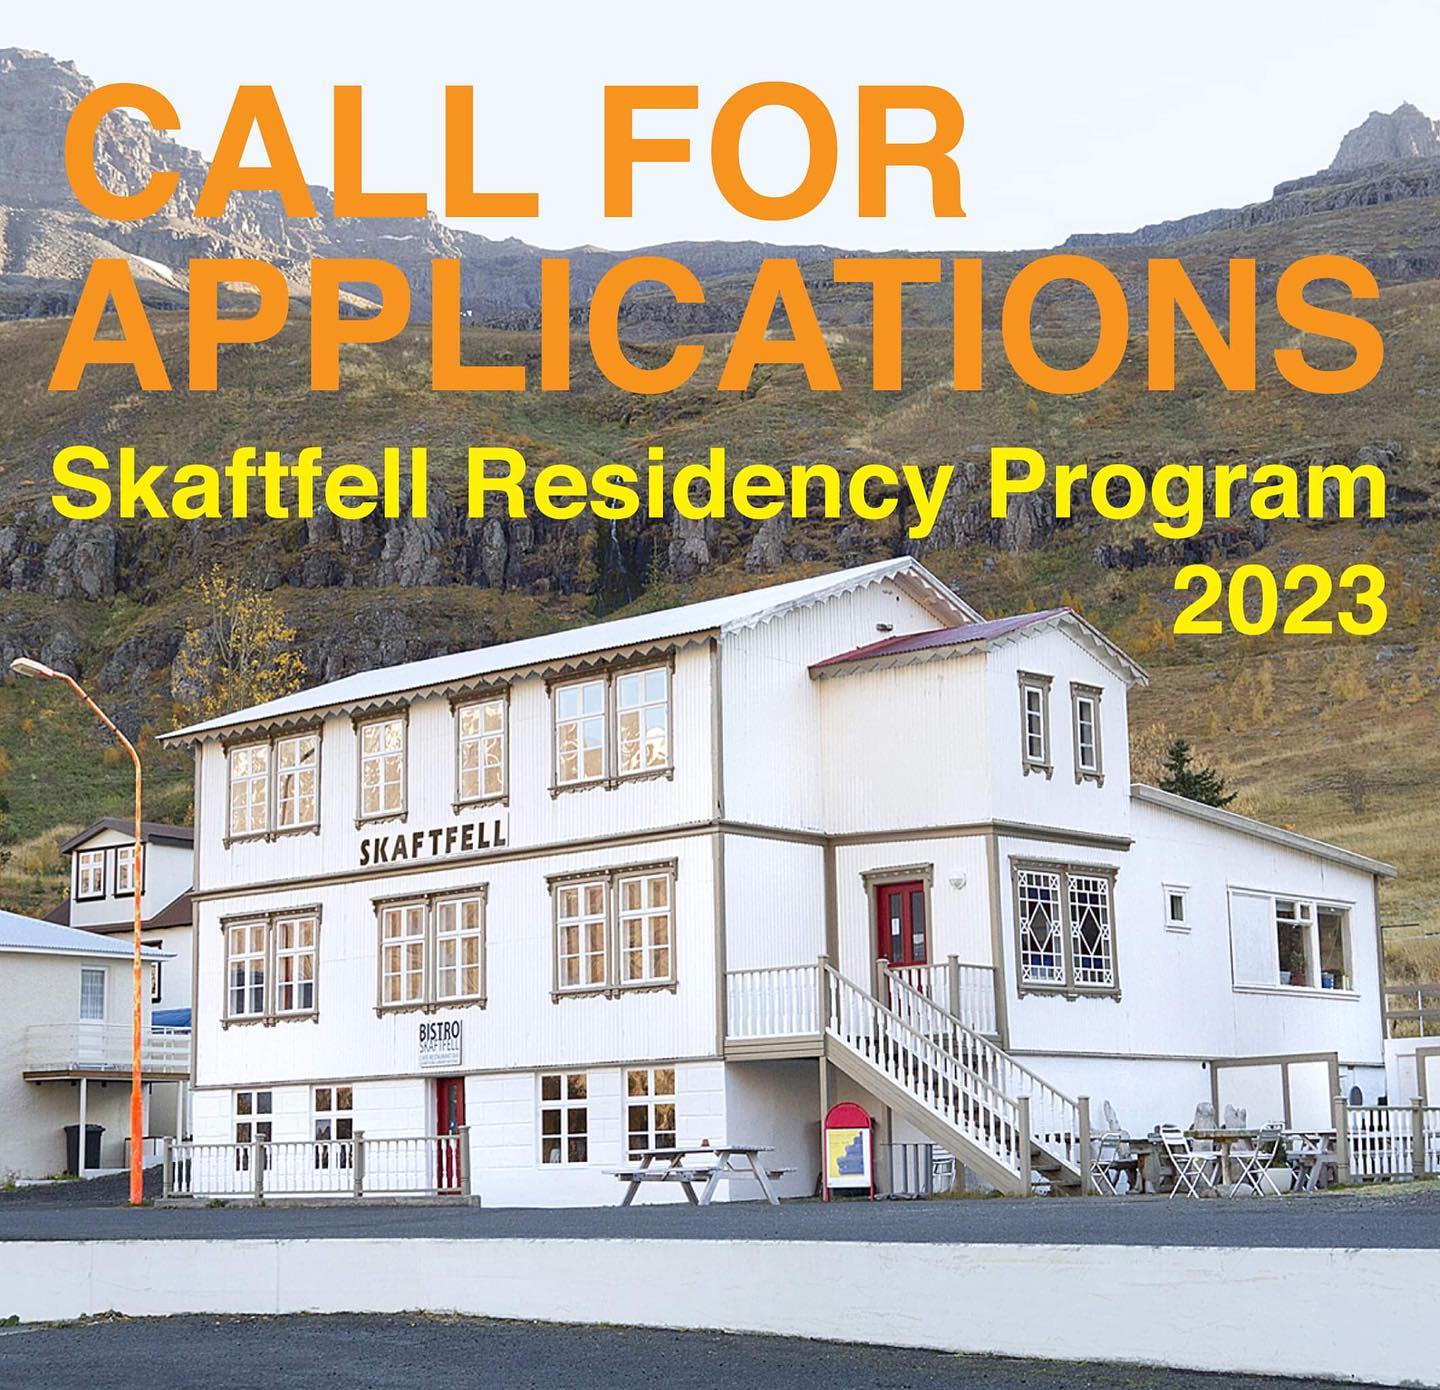 Skaftfell Residency Program – OPEN CALL 2023

Skaftfell is now inviting applications from individual artists and artistic collaborators to participate in its residency program in 2023. 

Application deadline: September 1, 2022

The Skaftfell residencies are self-directed. They offer quiet time and space for independent research, reflection, and experimentation. Artists are encouraged to use their stay for in-depth inquiries into their work processes and conceptual interests, to use the magnificent nature of the fjord as a source of energy and inspiration, and to embrace the idea of a “slow residency” that is embedded in a small but vibrant rural community. The program is best suited to visual artists, printmakers, artists with interdisciplinary practices, curators and art writers. 

Applications are received via our online application form.
Please visit Skaftfell’s website for the link and further information: https://skaftfell.is/en/call-for-applications-skaftfell-residency-program-2023/ 

Link in bio.

#skaftfellresidencyprogram #skaftfell #skaftfellartcenter #artistsinresidence #artistresidencies